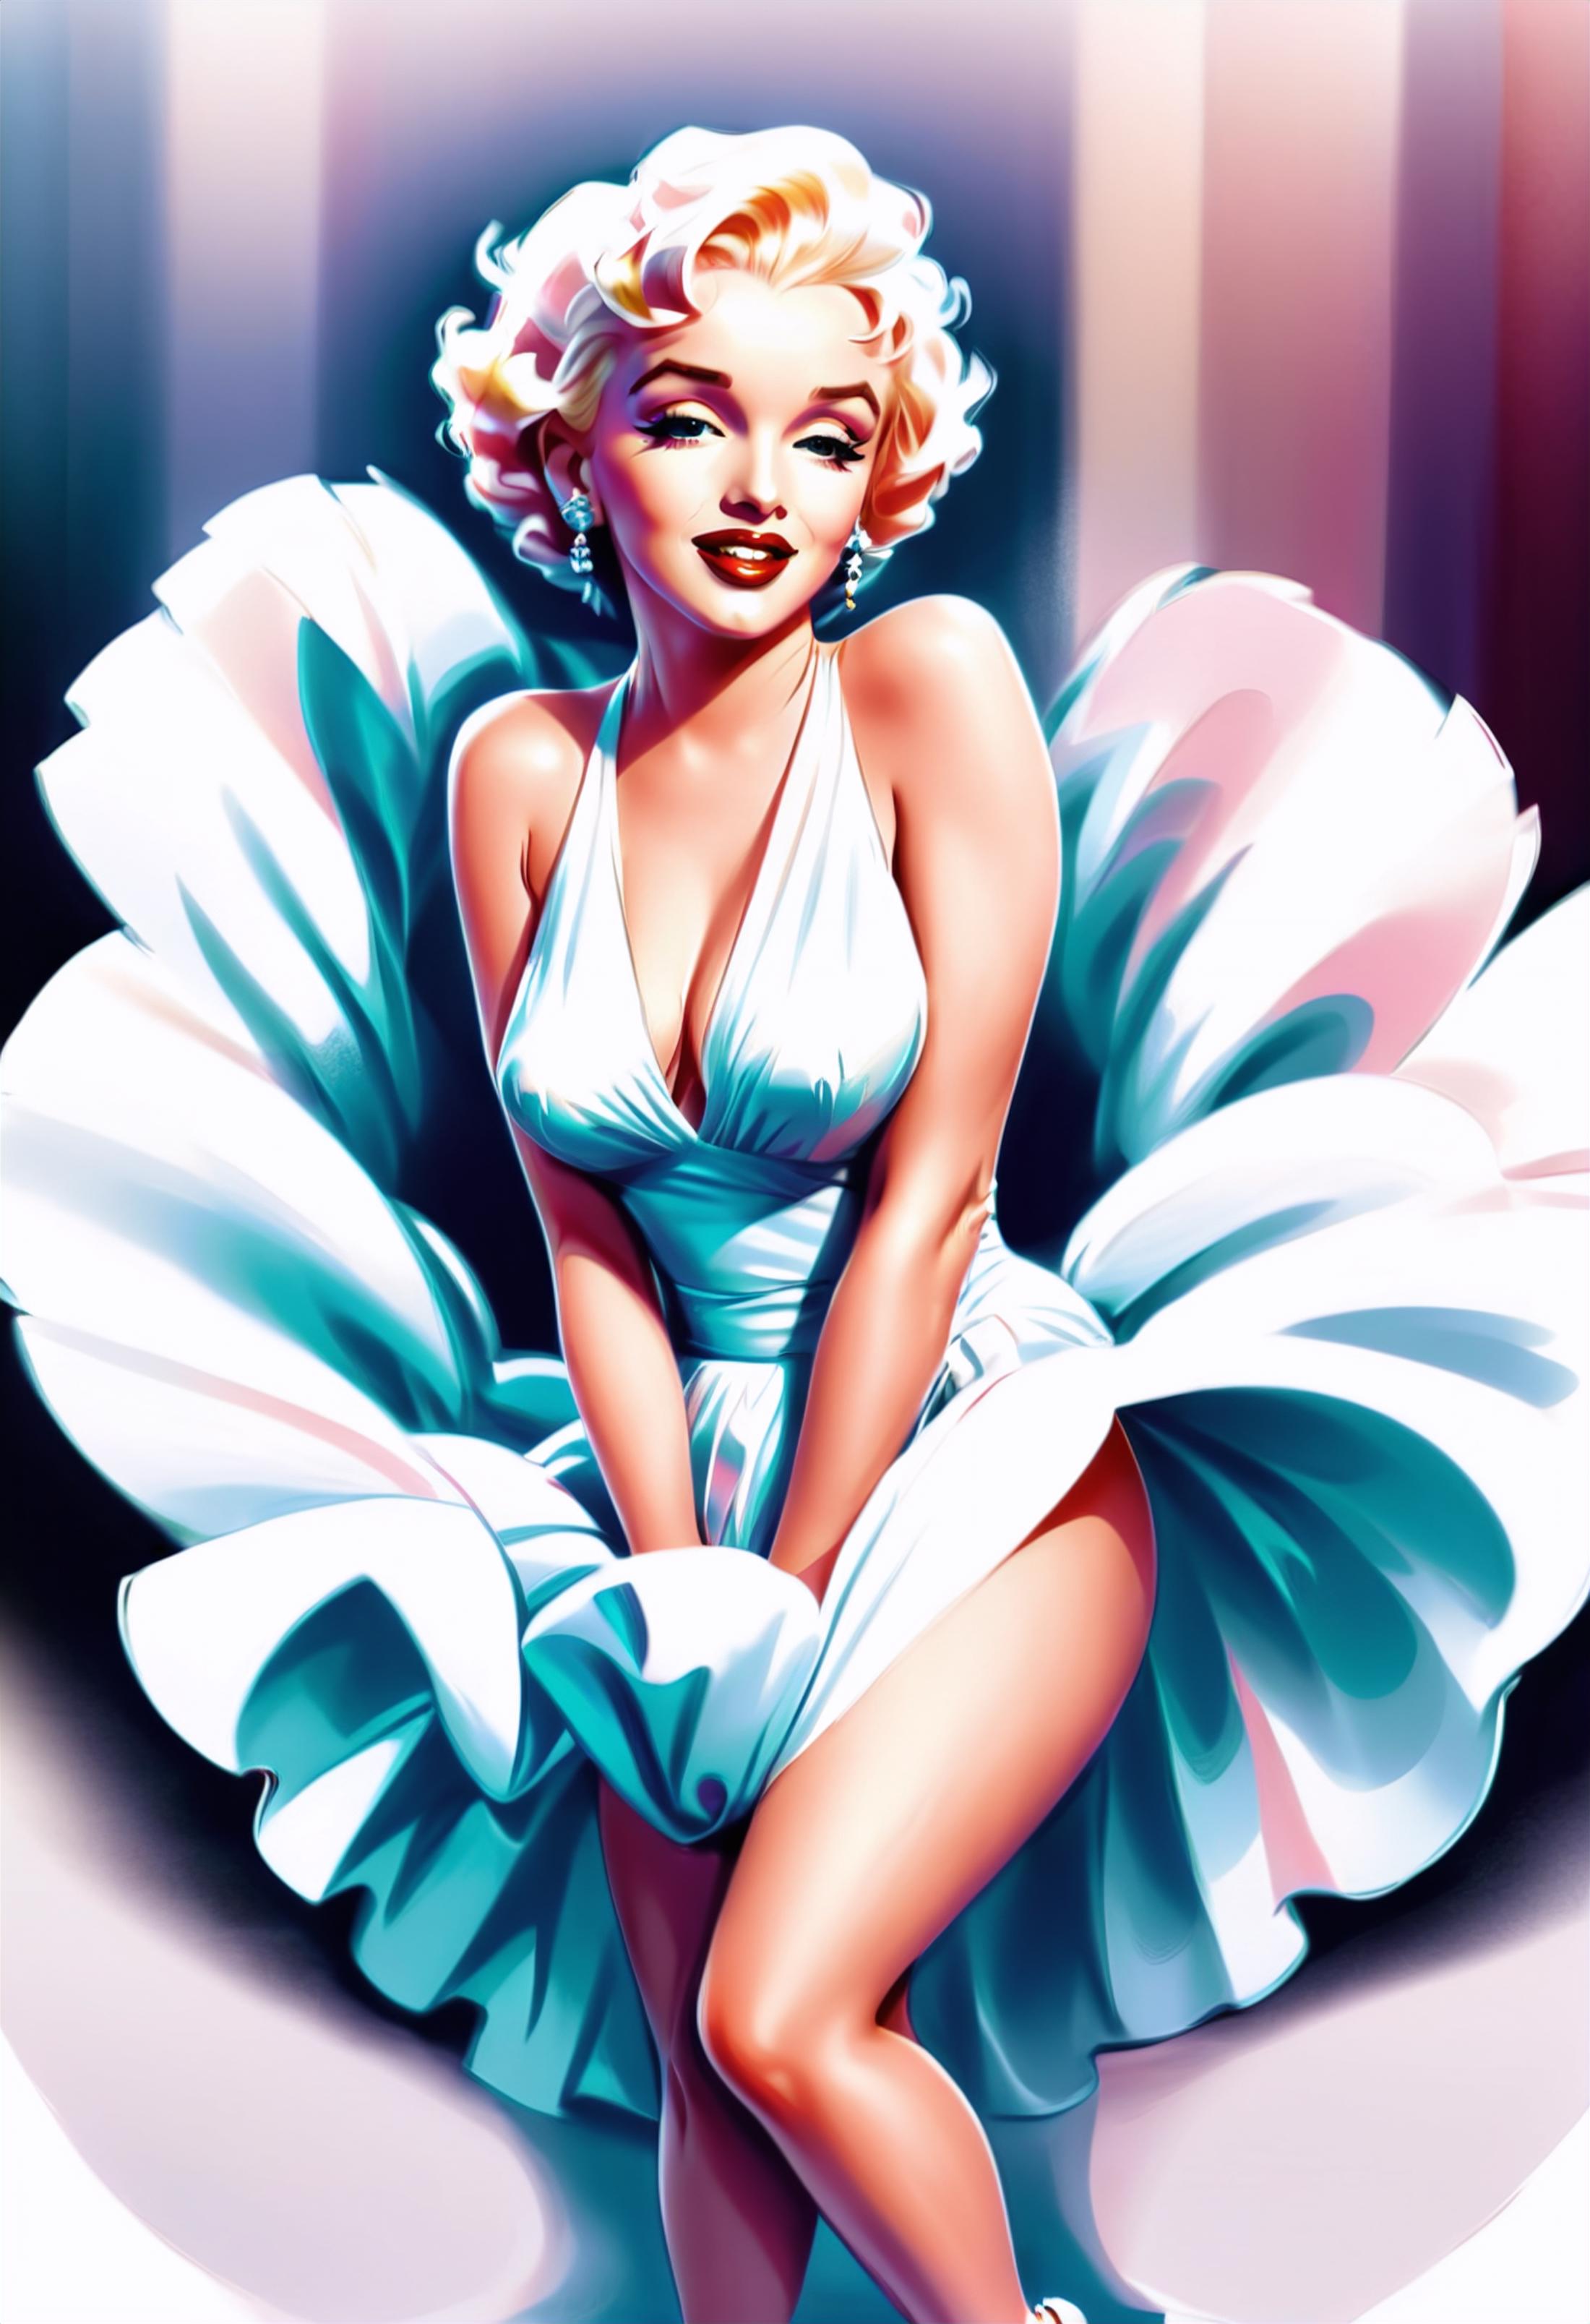 Marilyn Monroe dress blowing up [Pose] image by denrakeiw